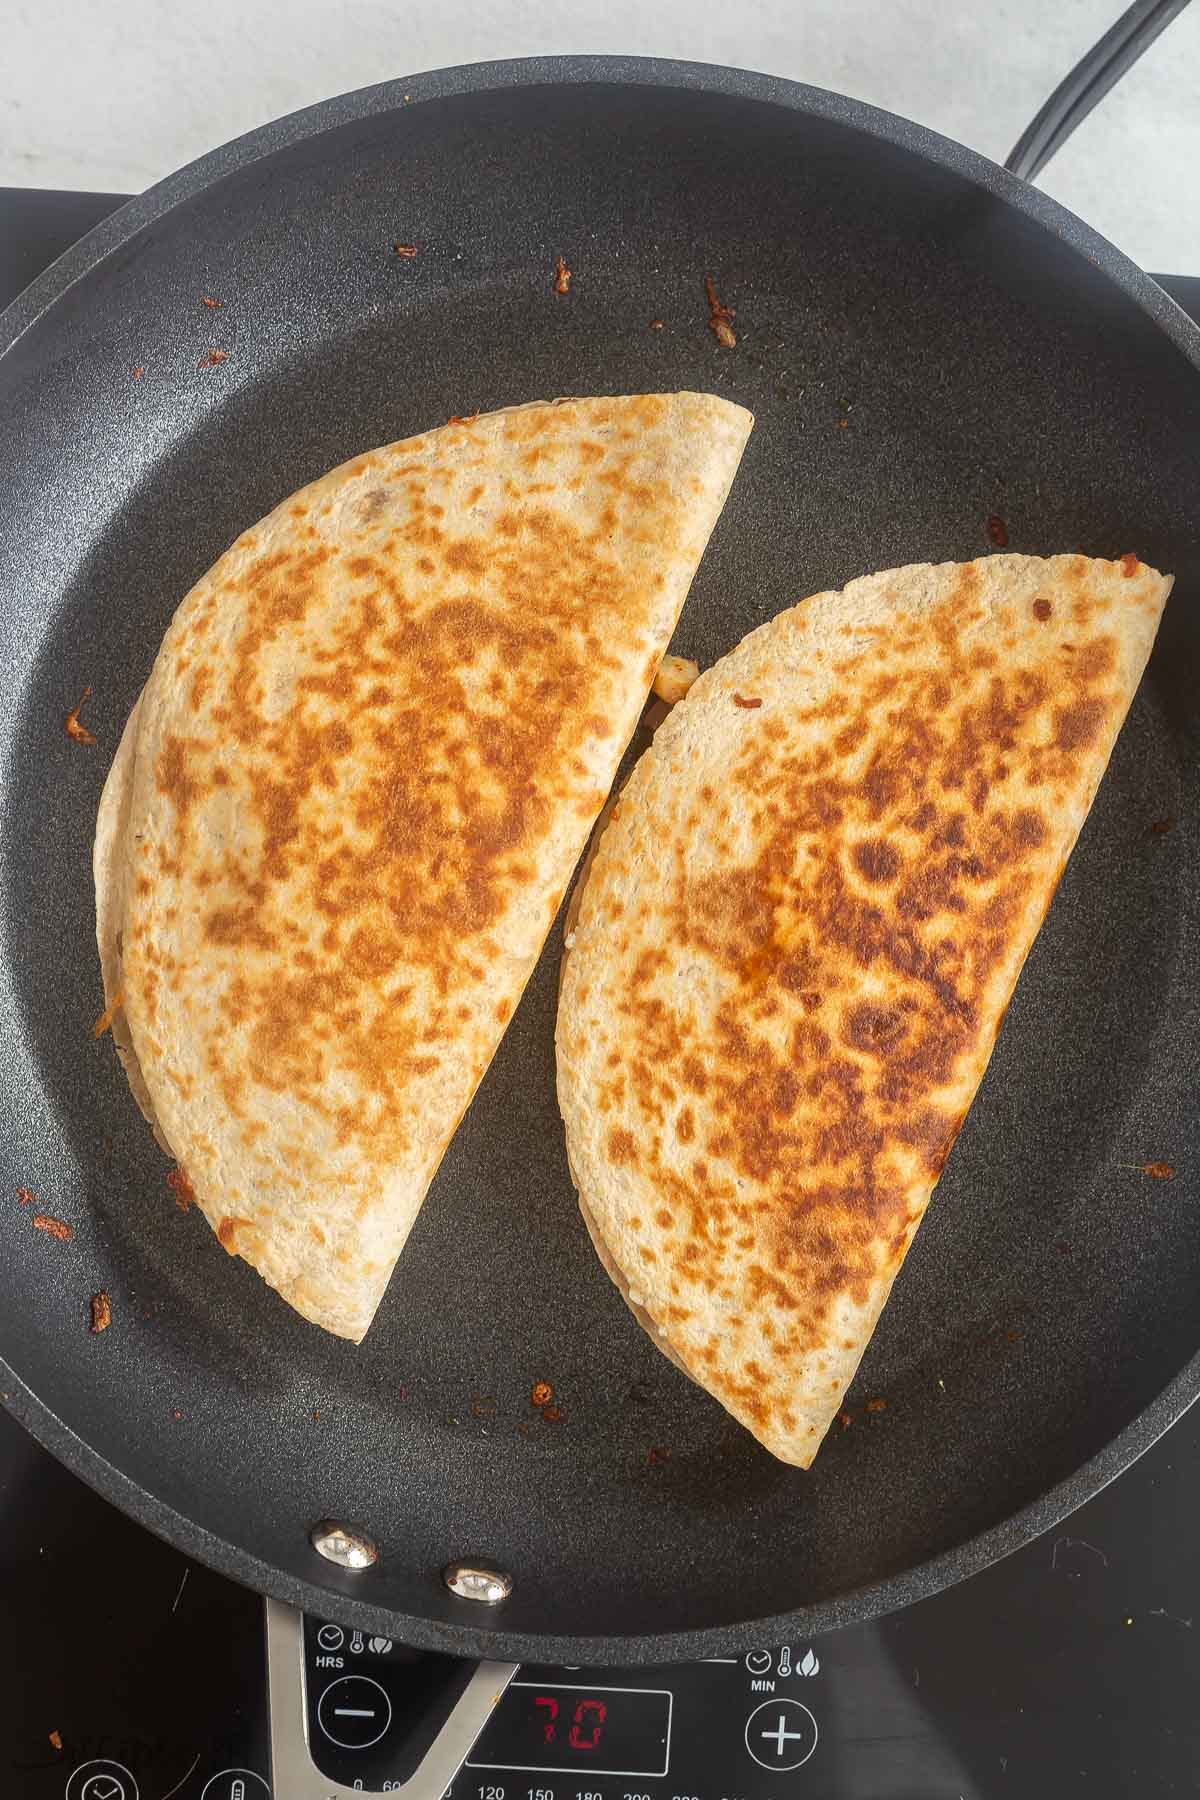 finished chicken quesadillas in a black skillet.